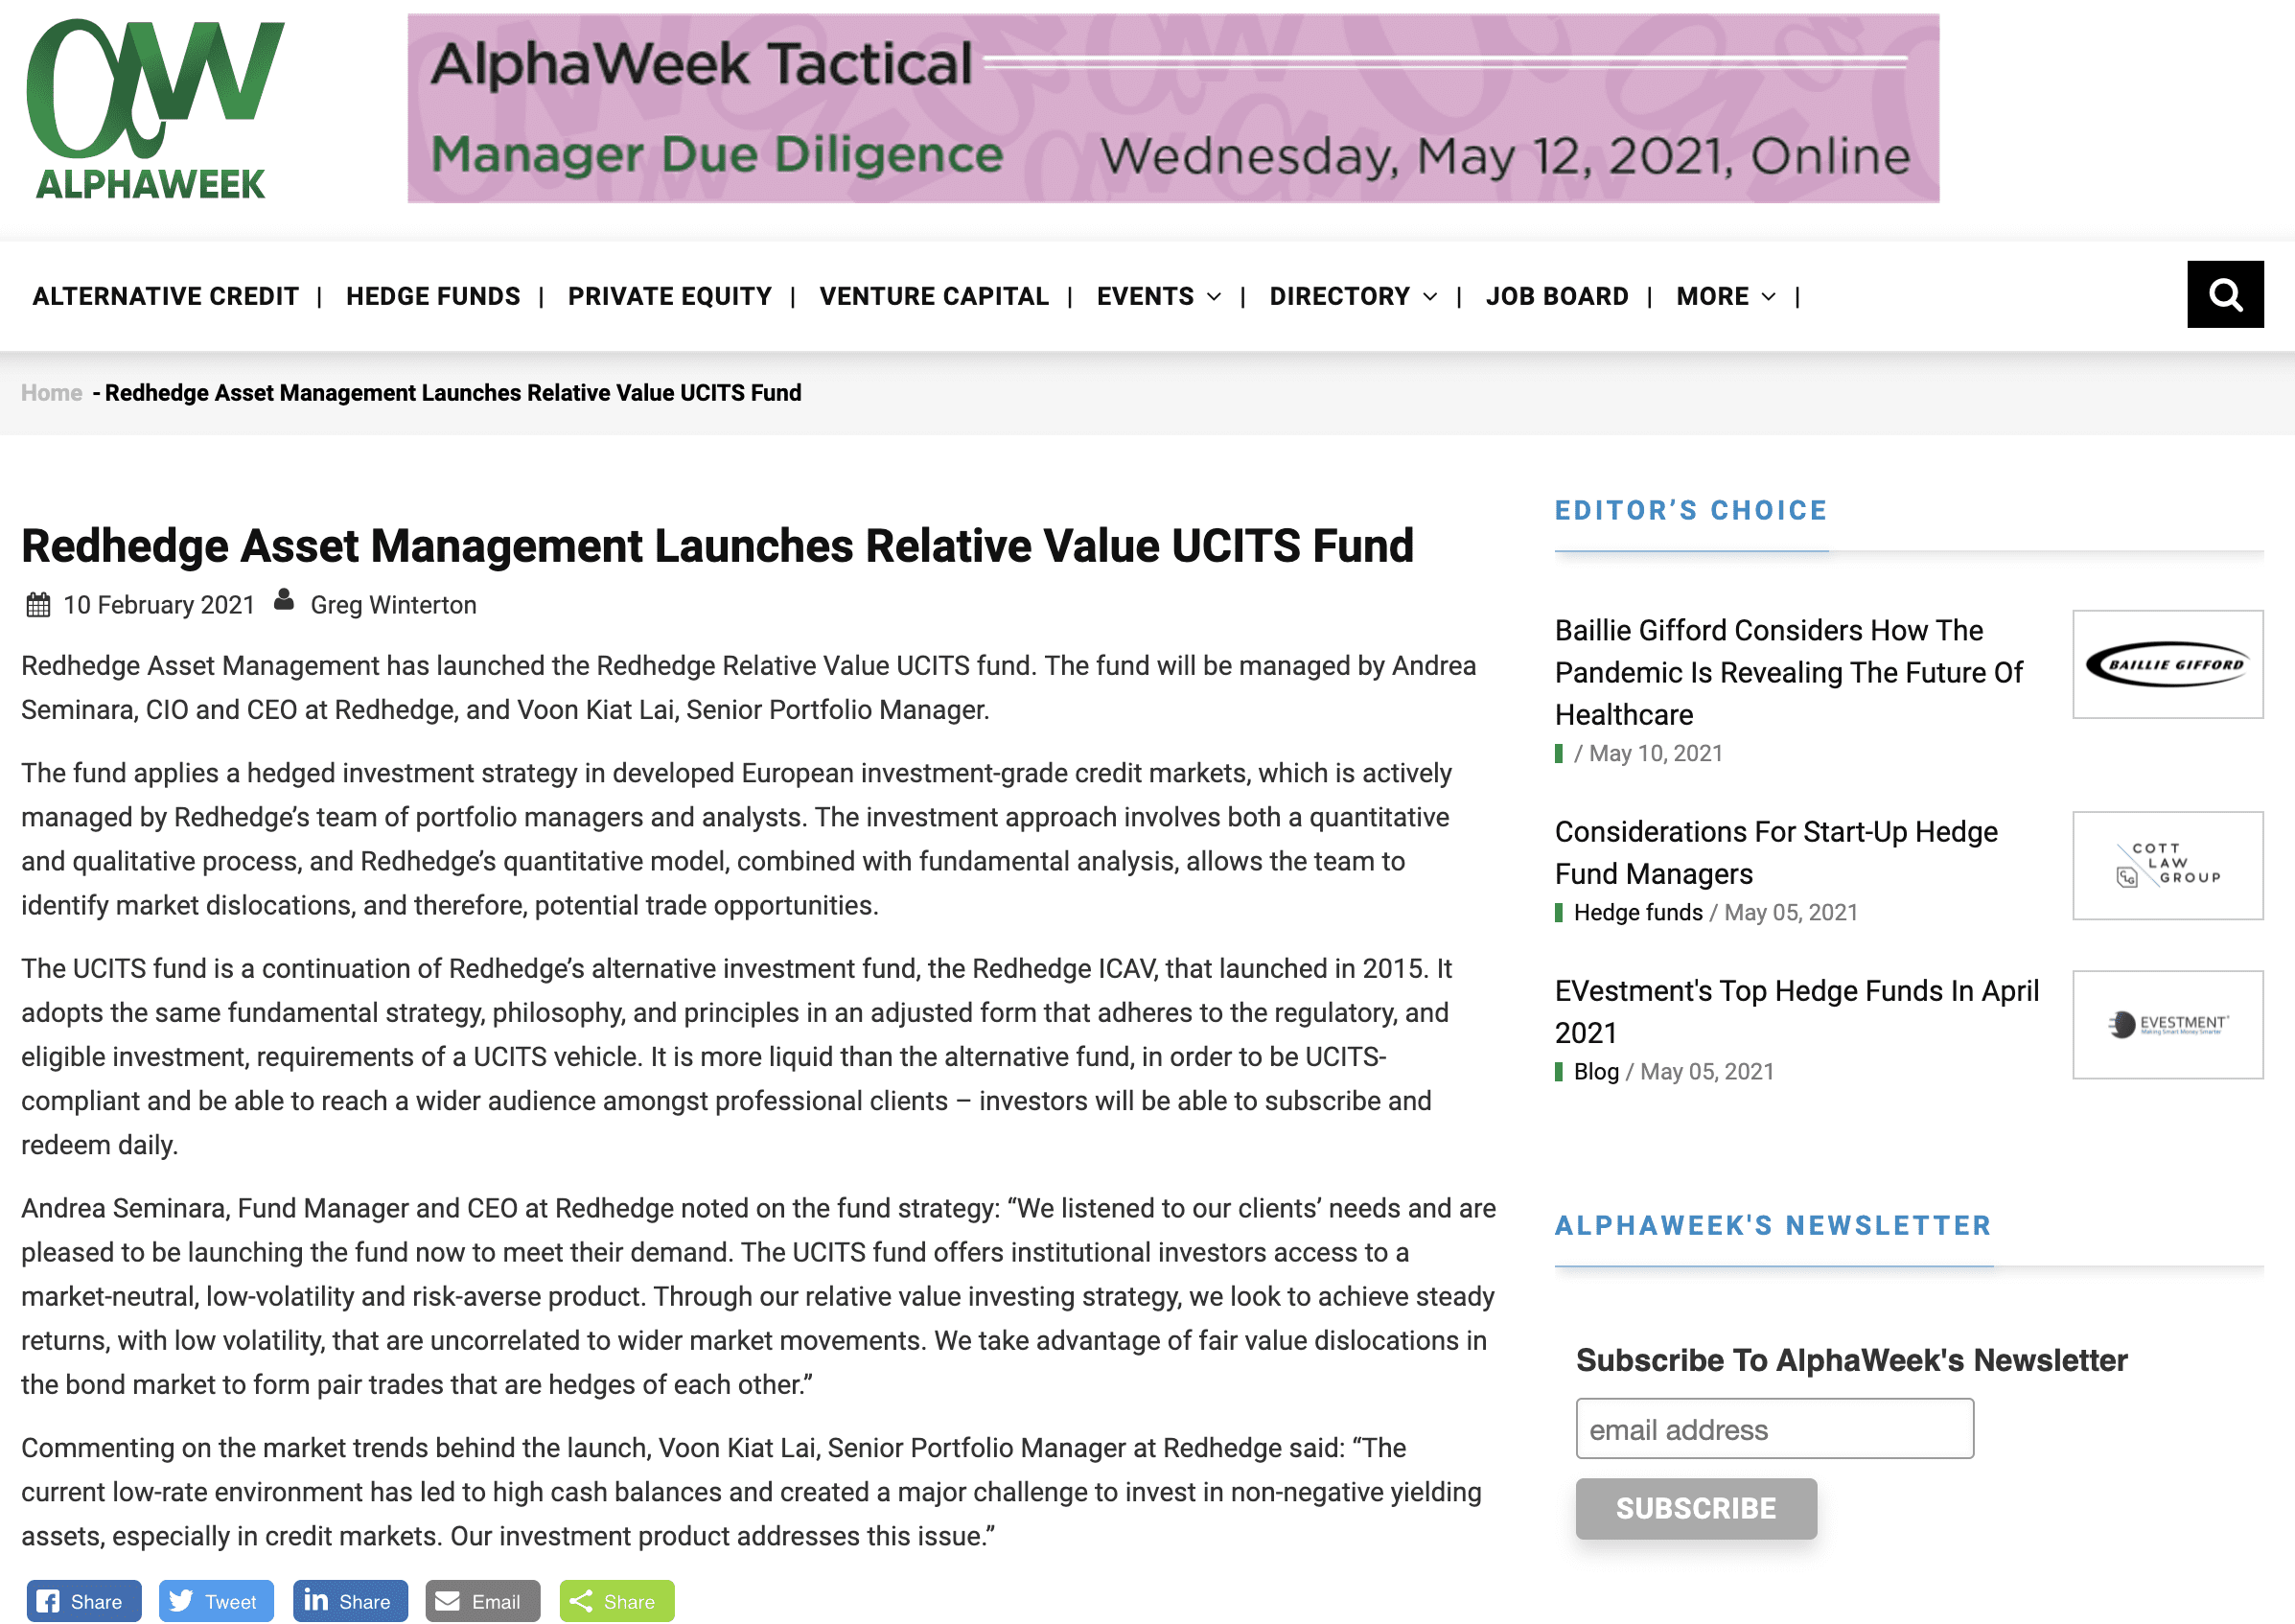 AlphaWeek: ‘Redhedge Asset Management Launches Relative Value UCITS Fund’